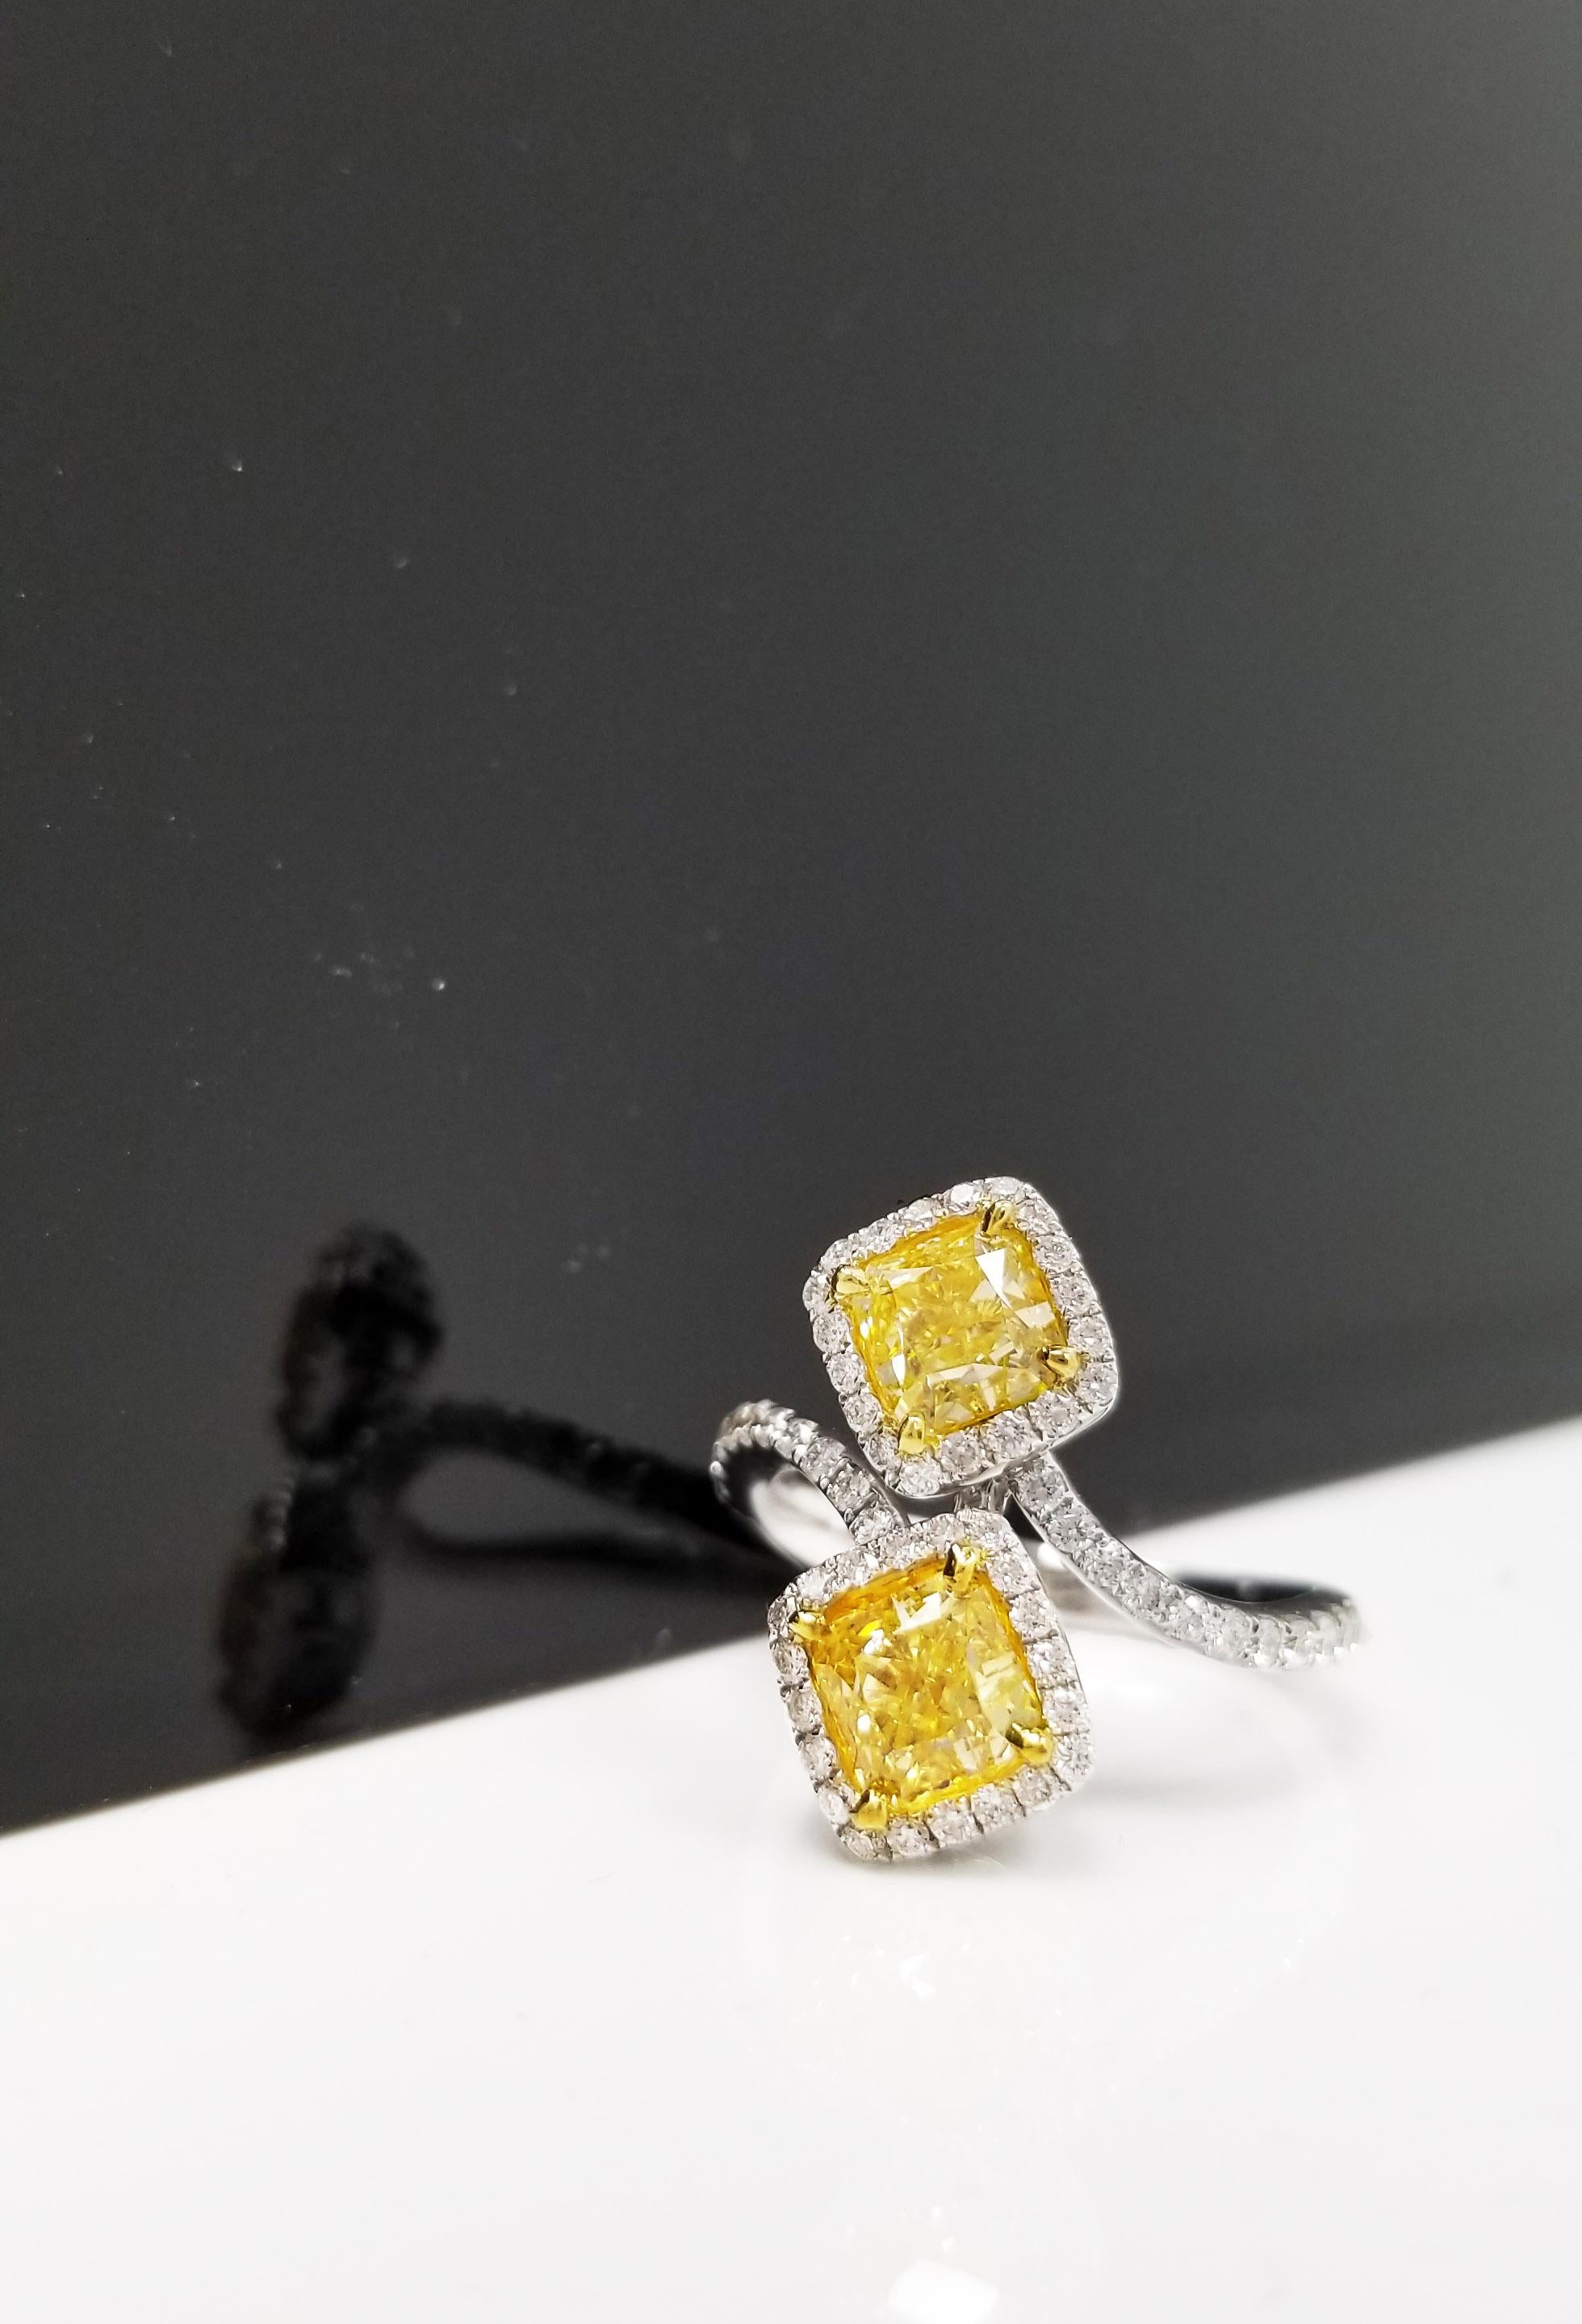 From SCARSELLI, spectacularly designed ring in 18k white gold featuring 1.00 & 1.03 carat Fancy Yellow Radiant Cut Diamonds GIA certified (see certificate pictures for detailed stones' information) set with round brilliant diamonds totaling 0.55